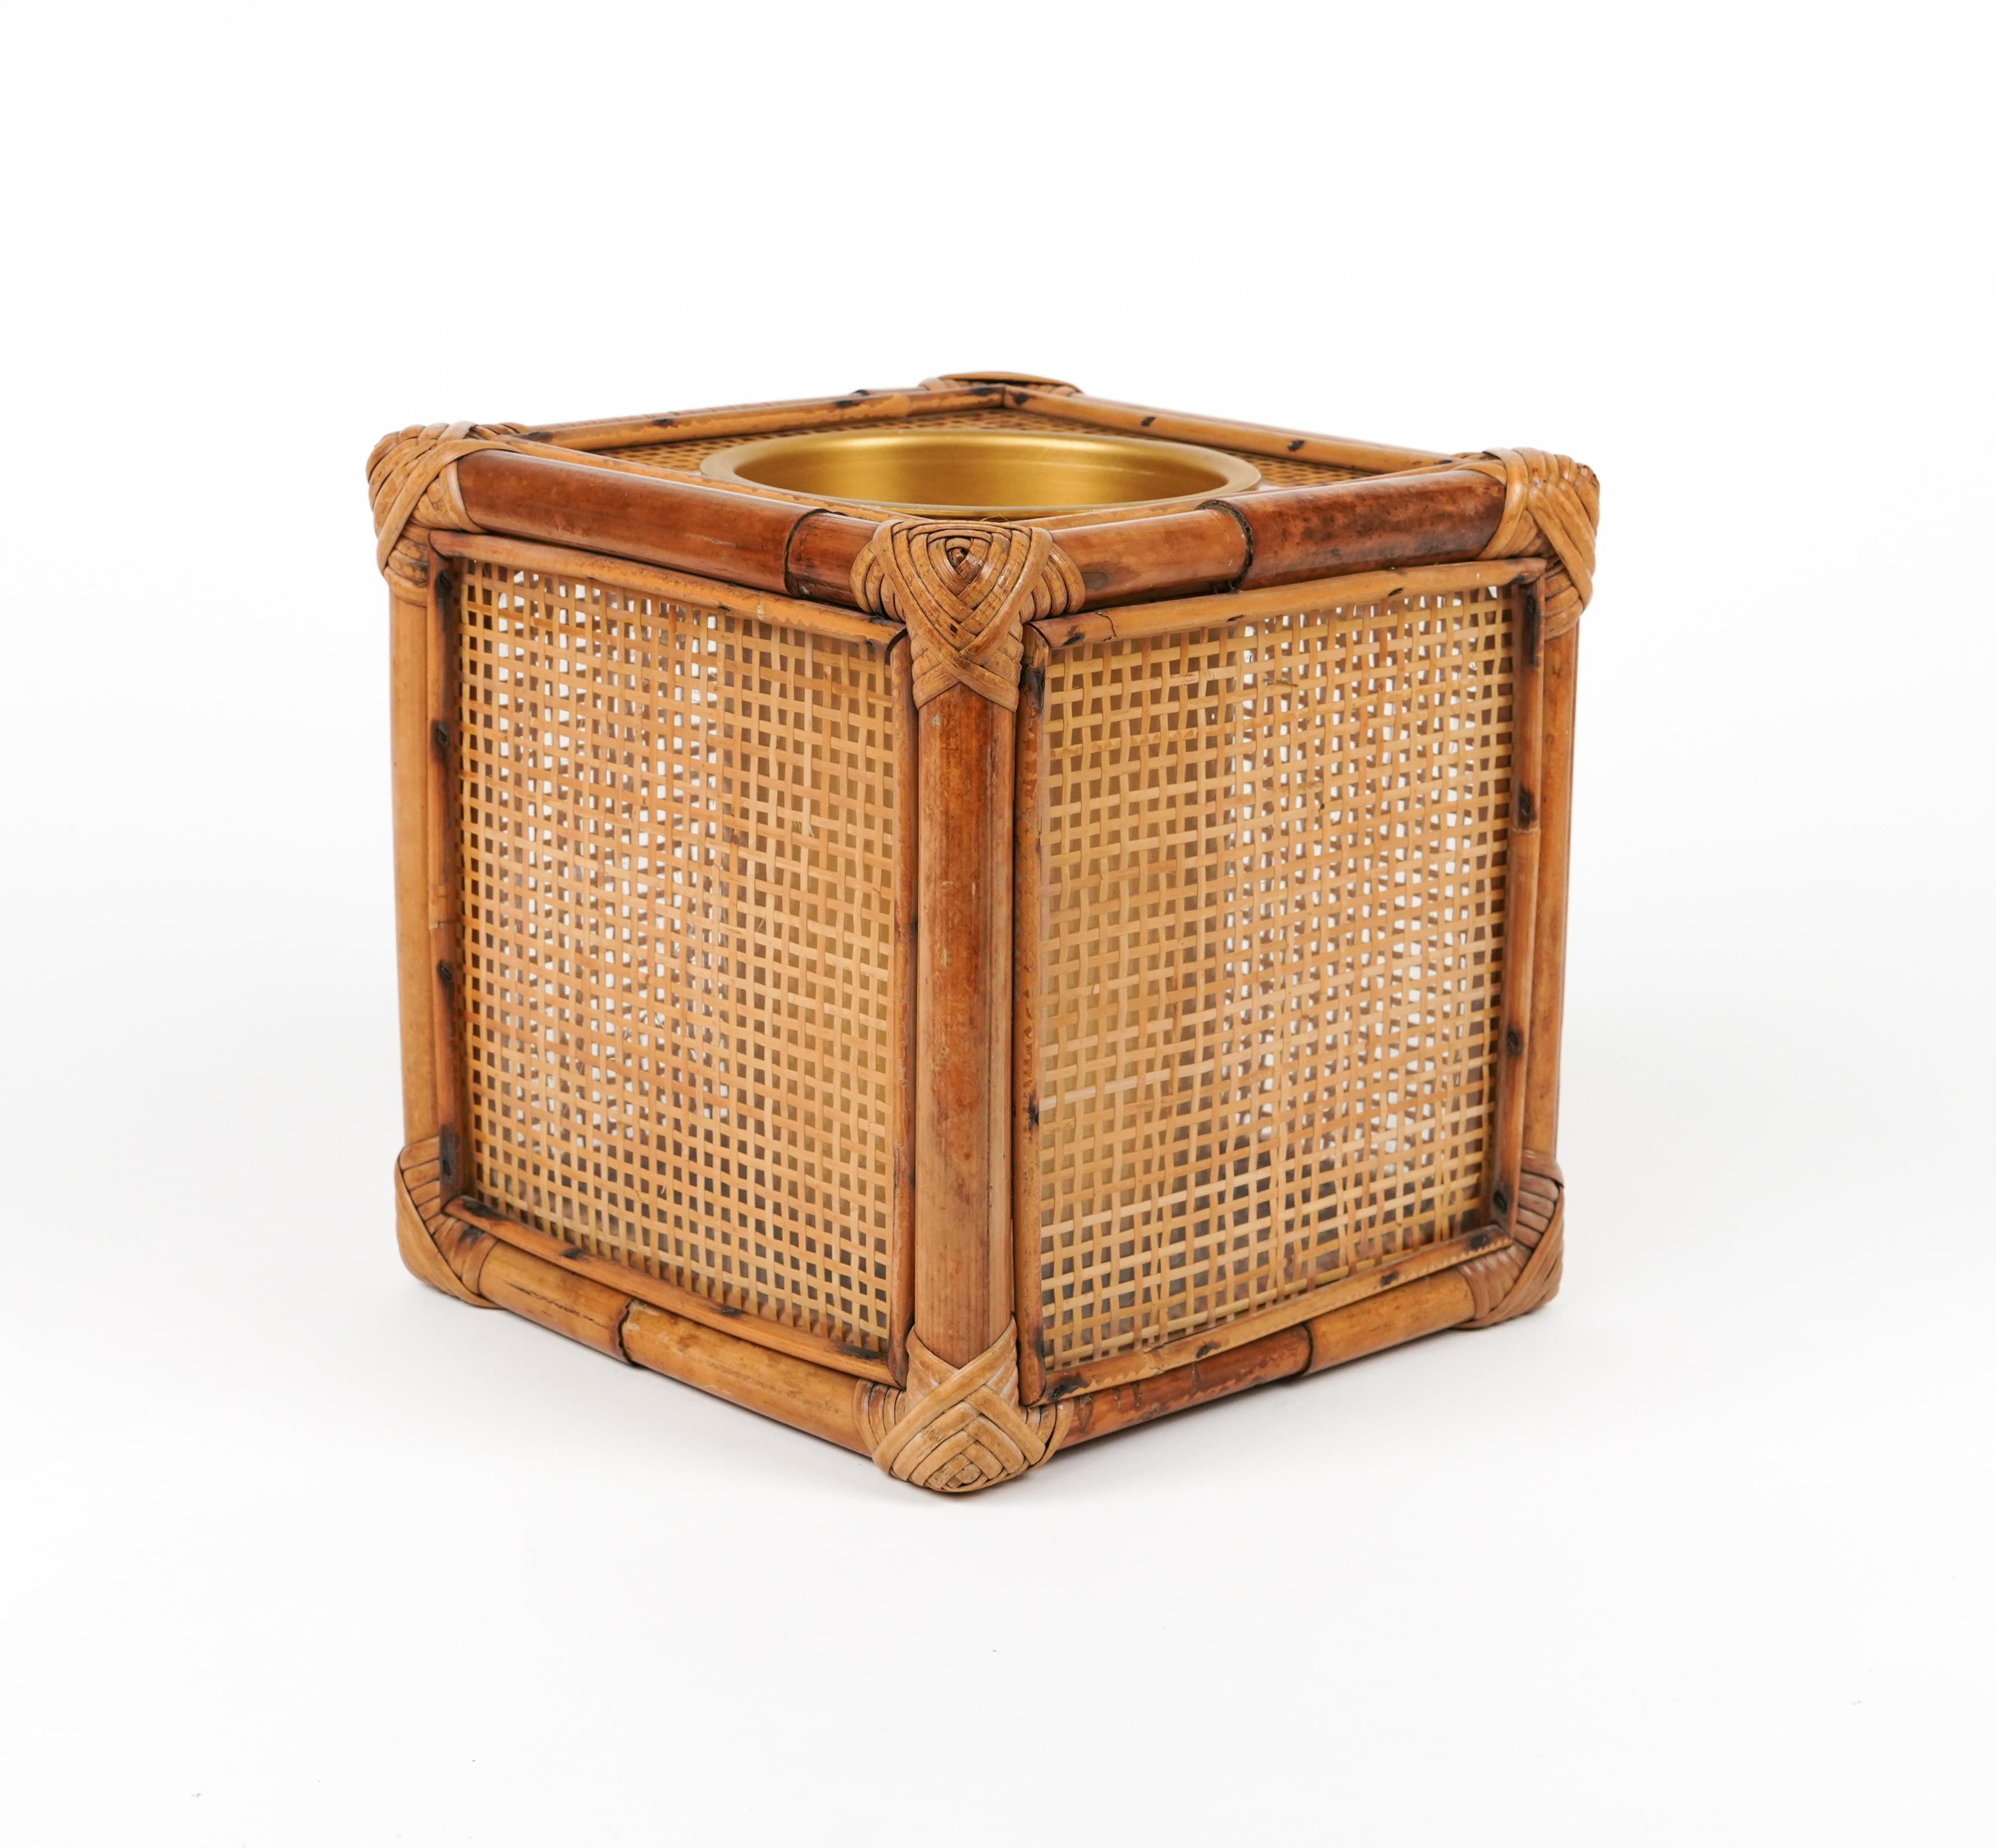 Metal Ice Bucket in Bamboo, Rattan and Lucite Christian Dior Style, Italy 1970s For Sale